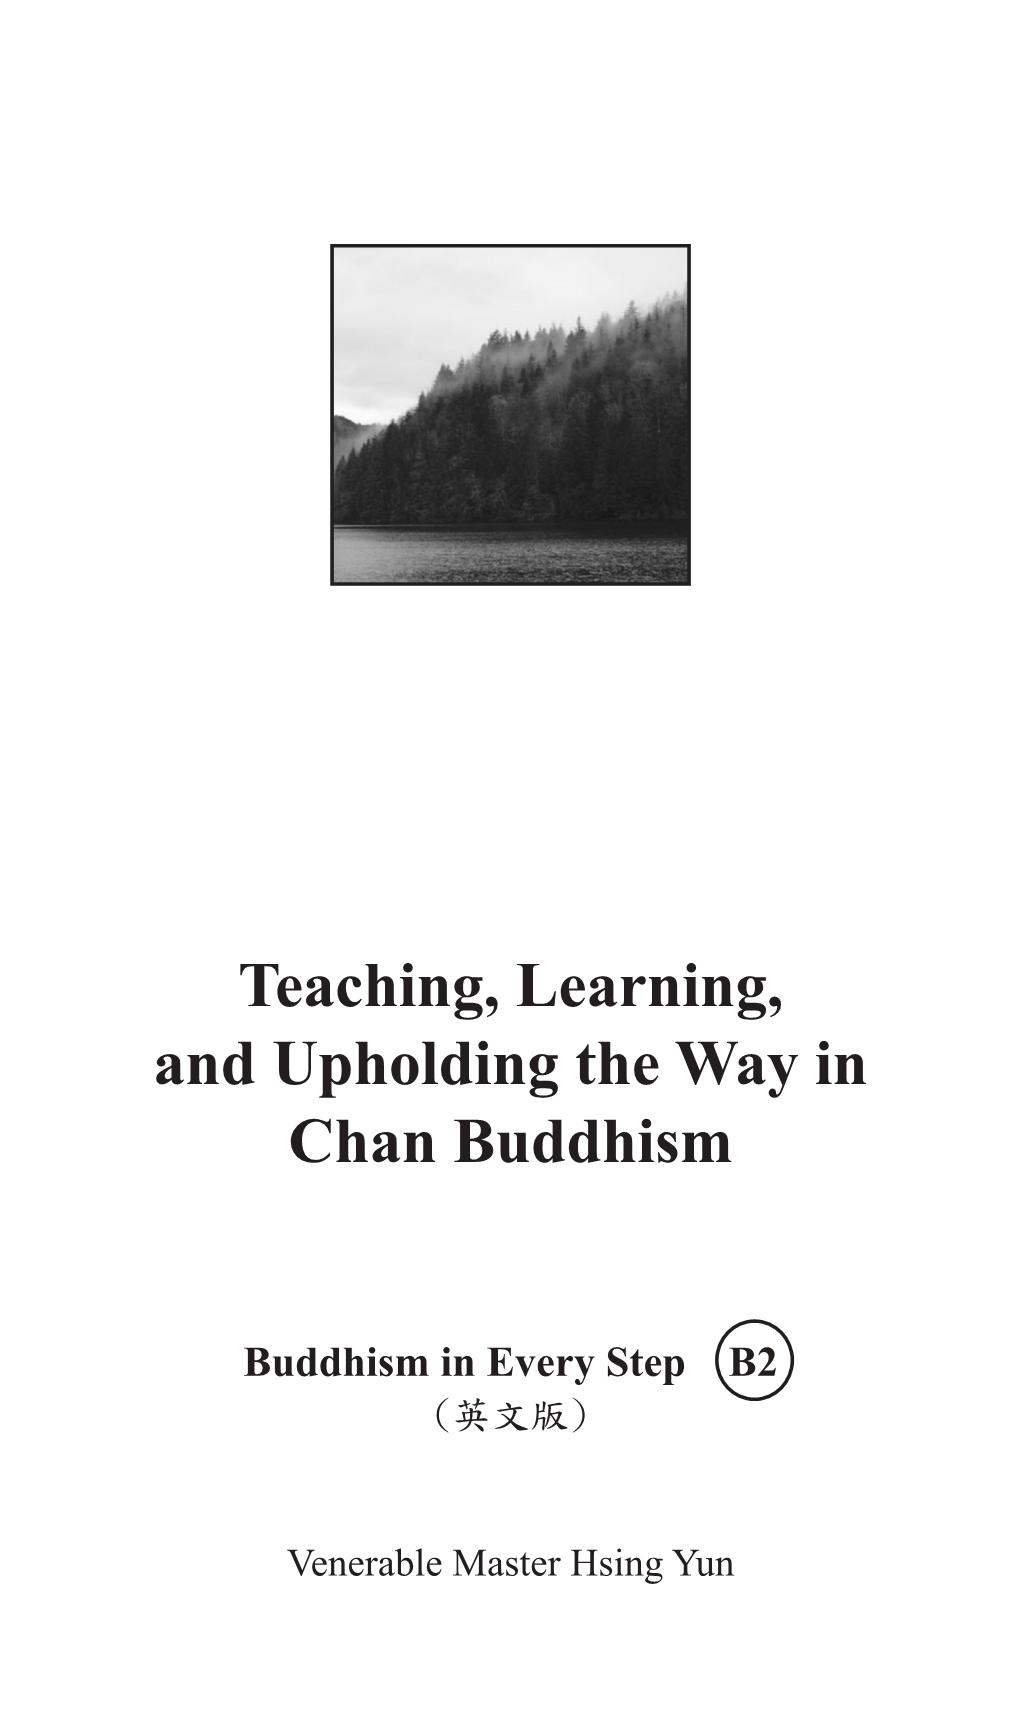 Teaching, Learning, and Upholding the Way in Chan Buddhism